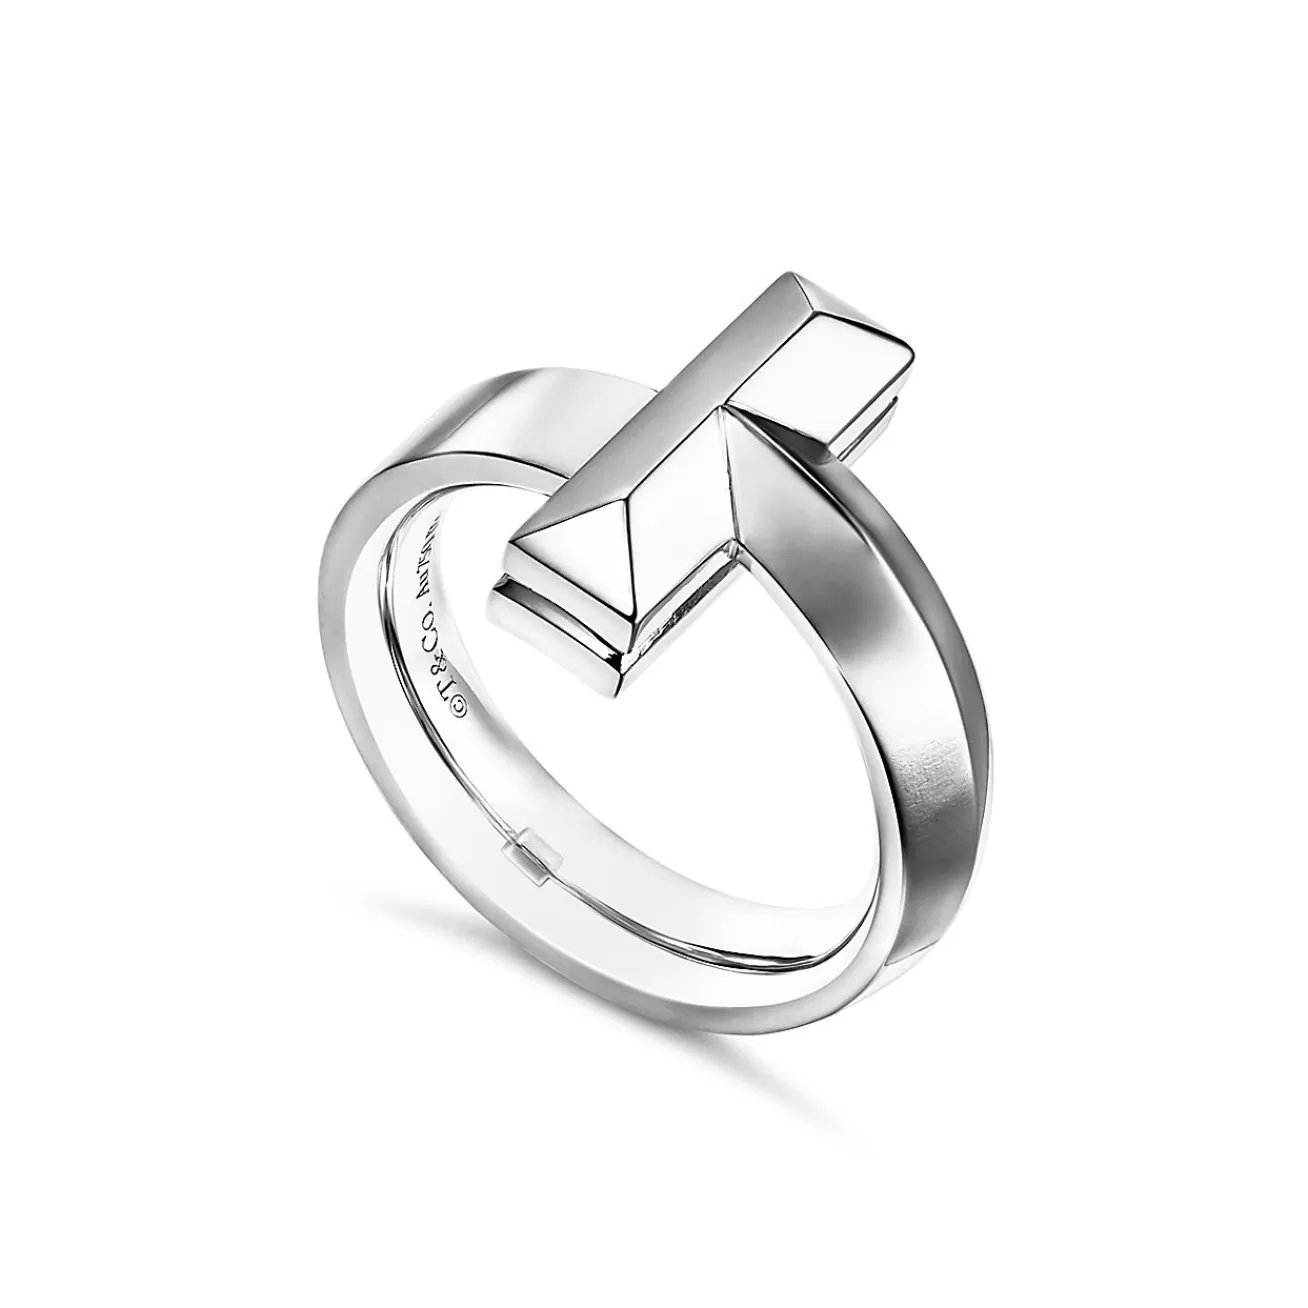 Tiffany & Co. Tiffany T T1 Ring in White Gold, 4.5 mm Wide | ^ Rings | Men's Jewelry